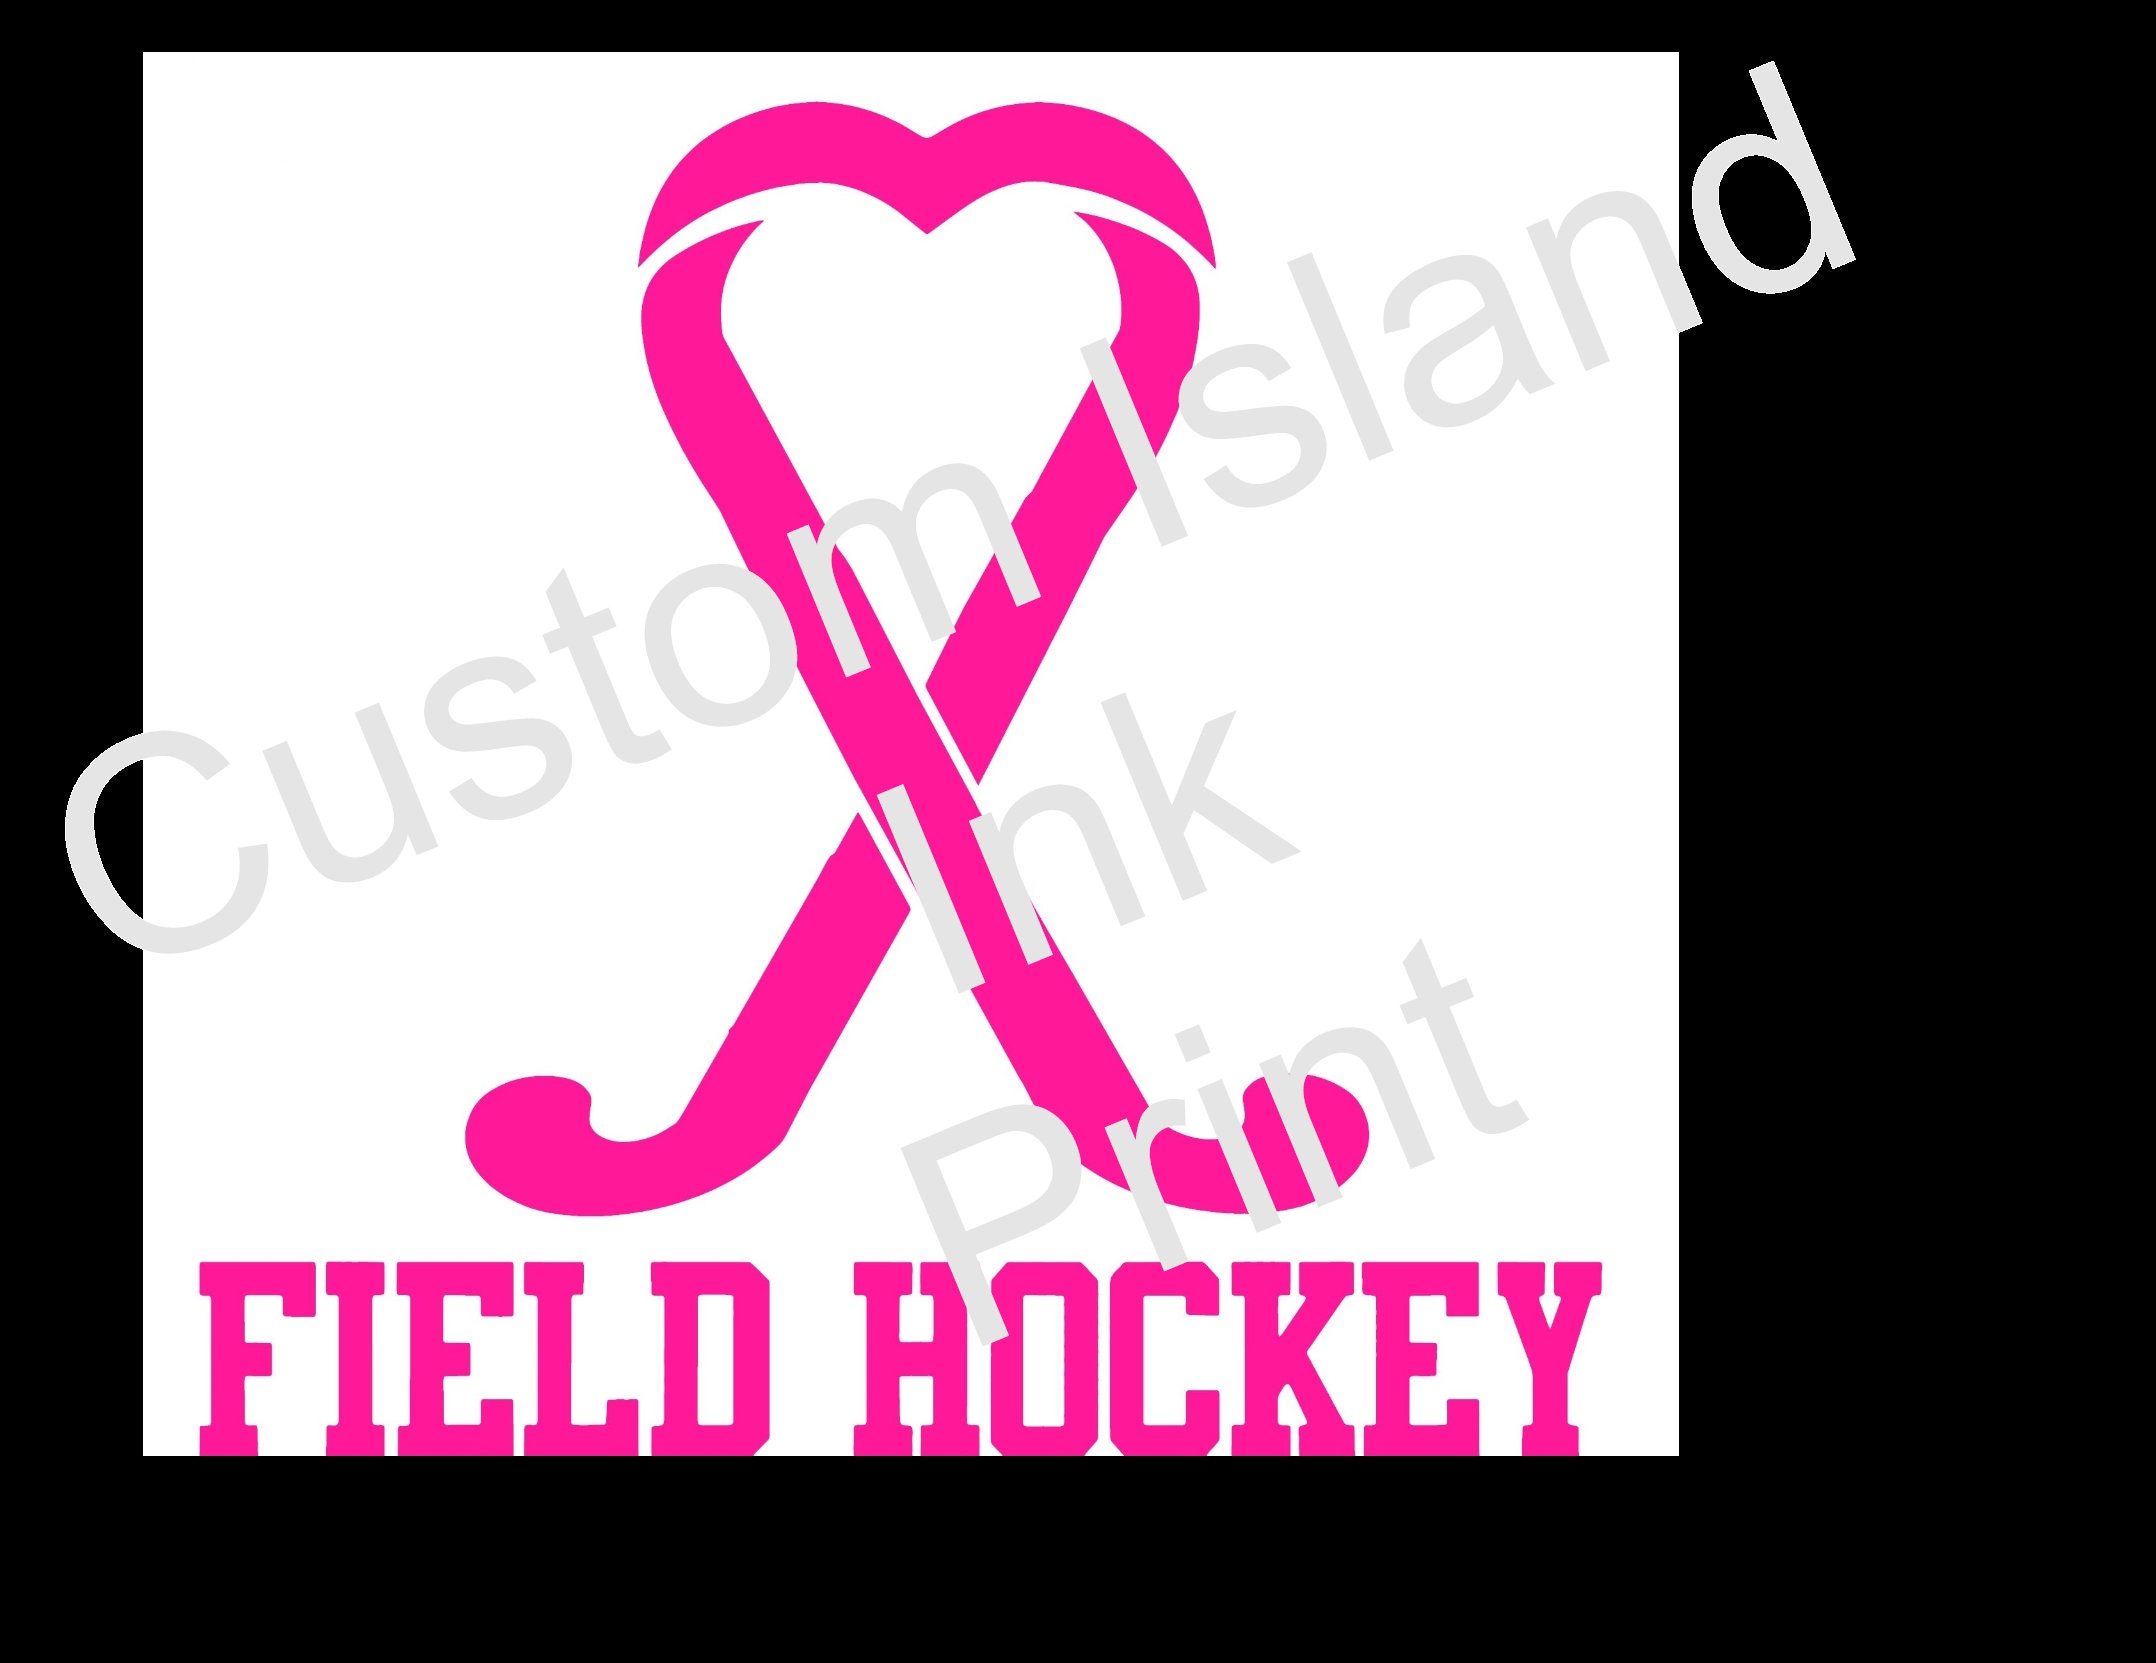 Field Hockey for Girls Breast Cancer Awareness Ribbon Poster